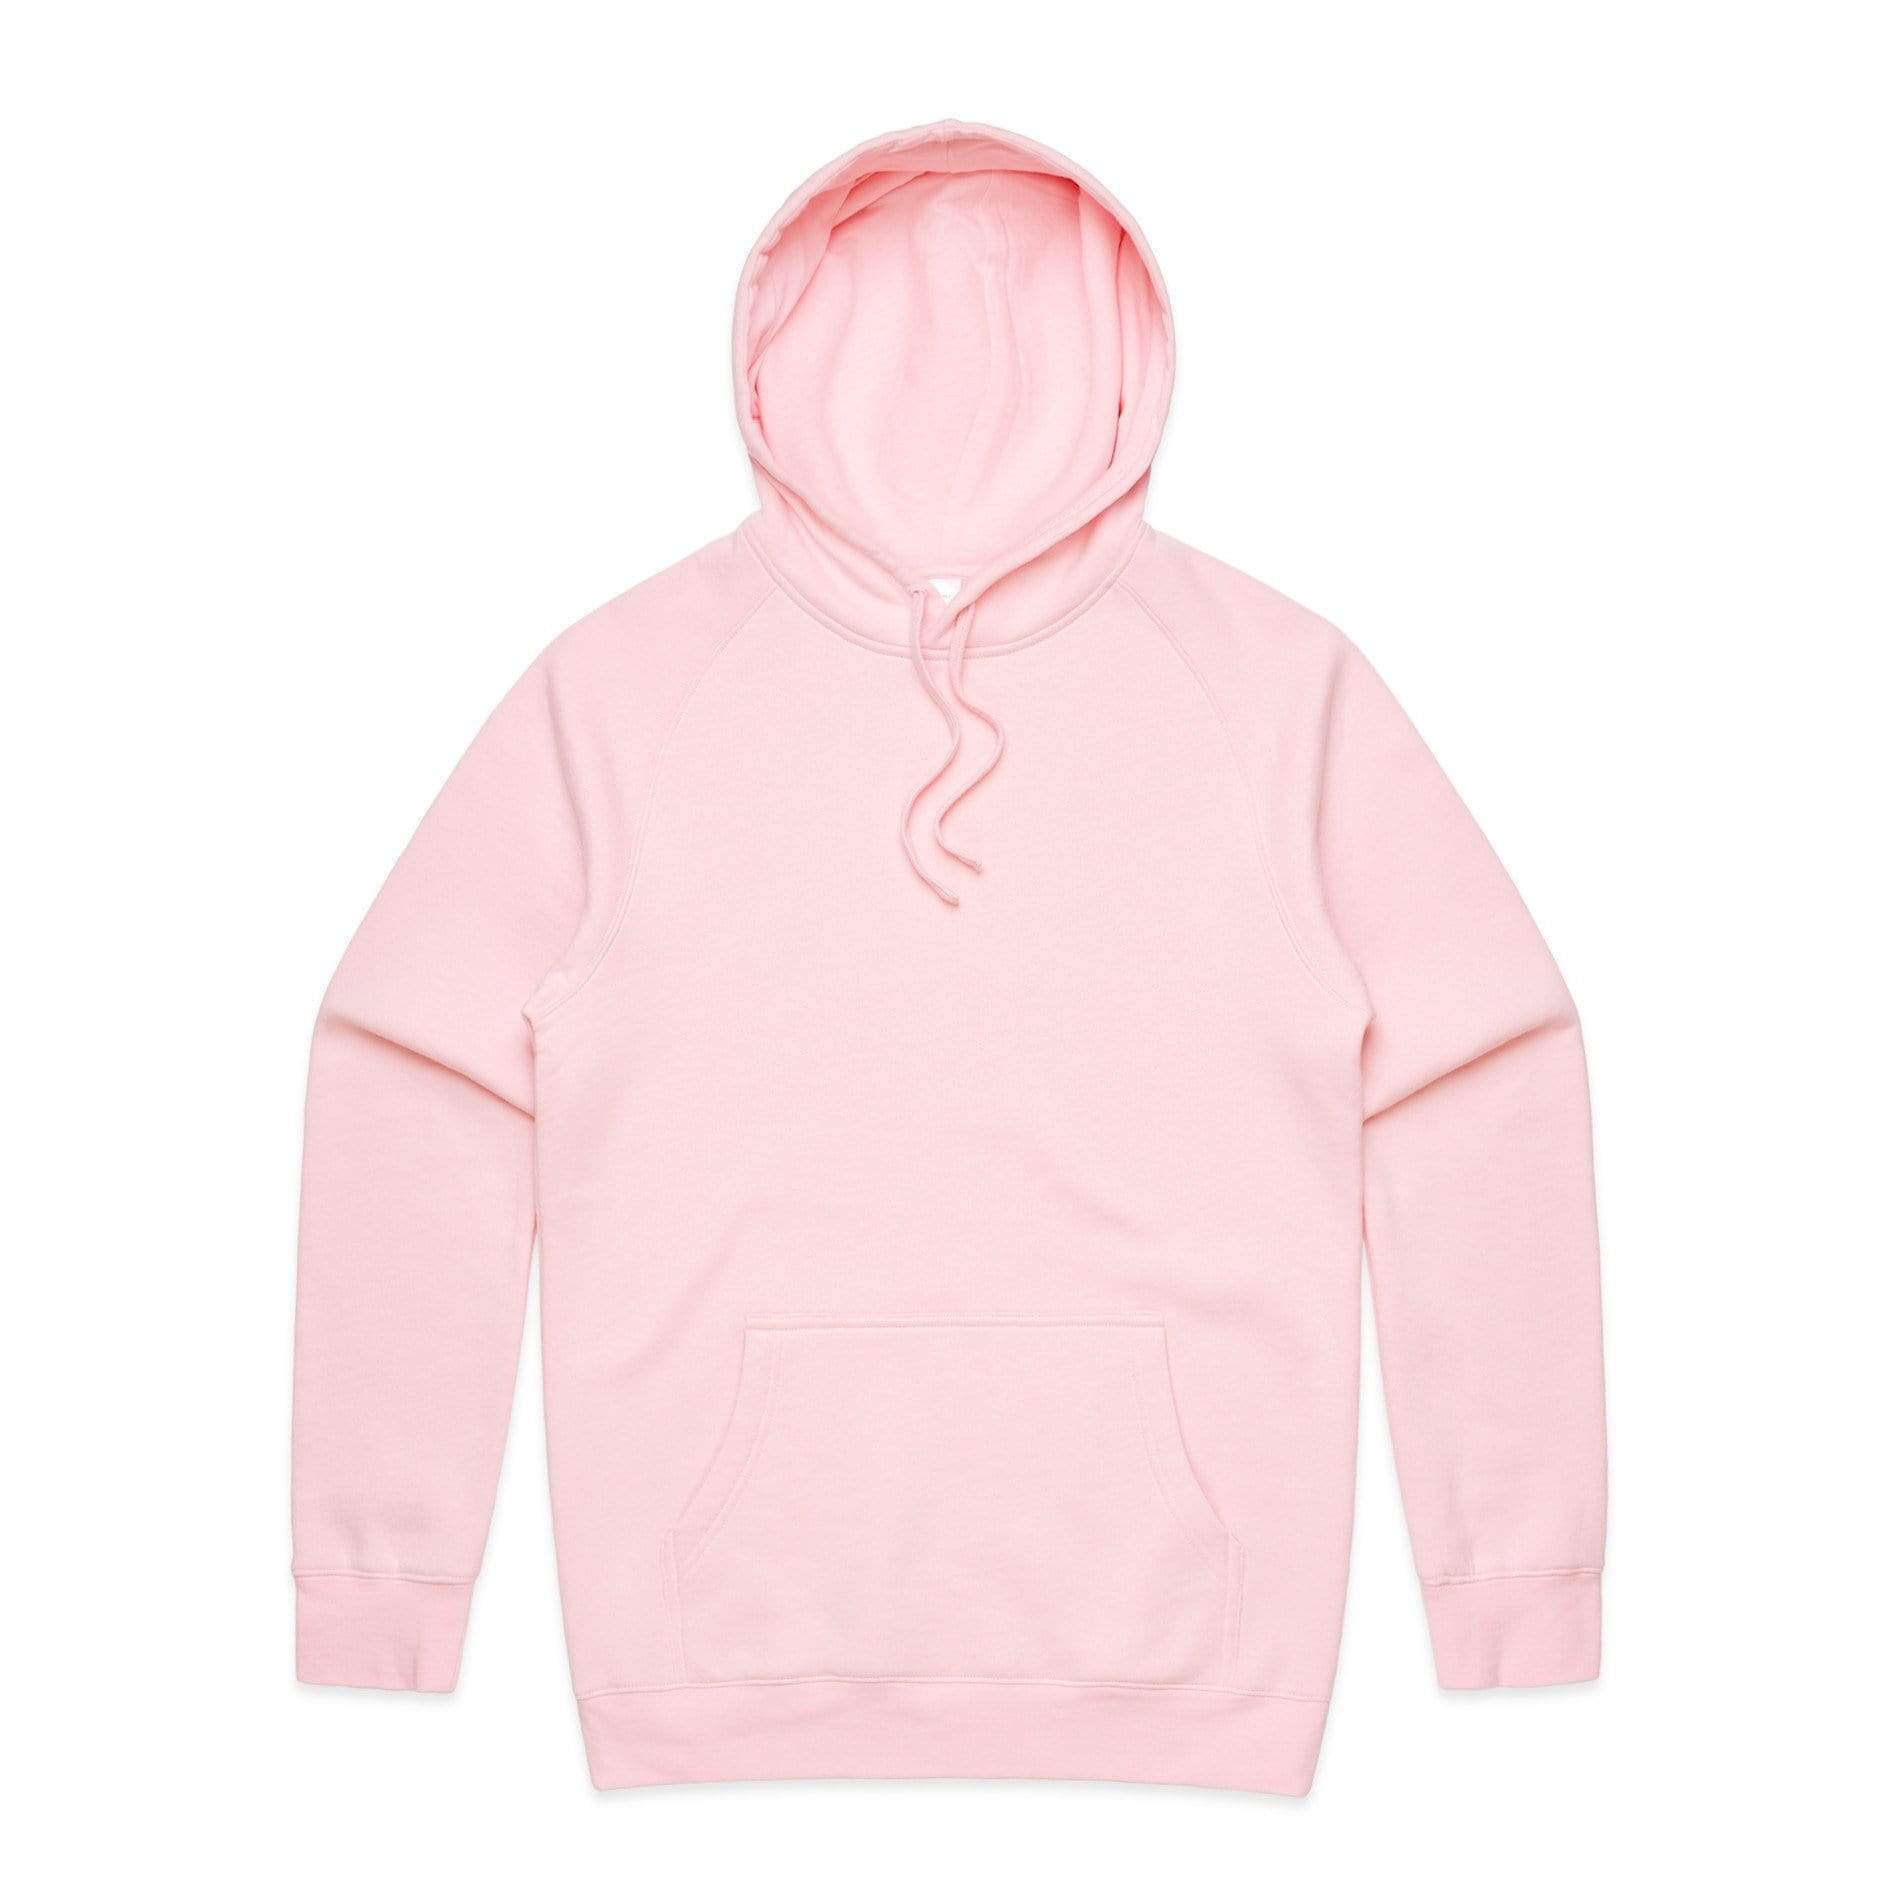 As Colour Casual Wear PINK / XSM As Colour Men's supply hoodie 5101